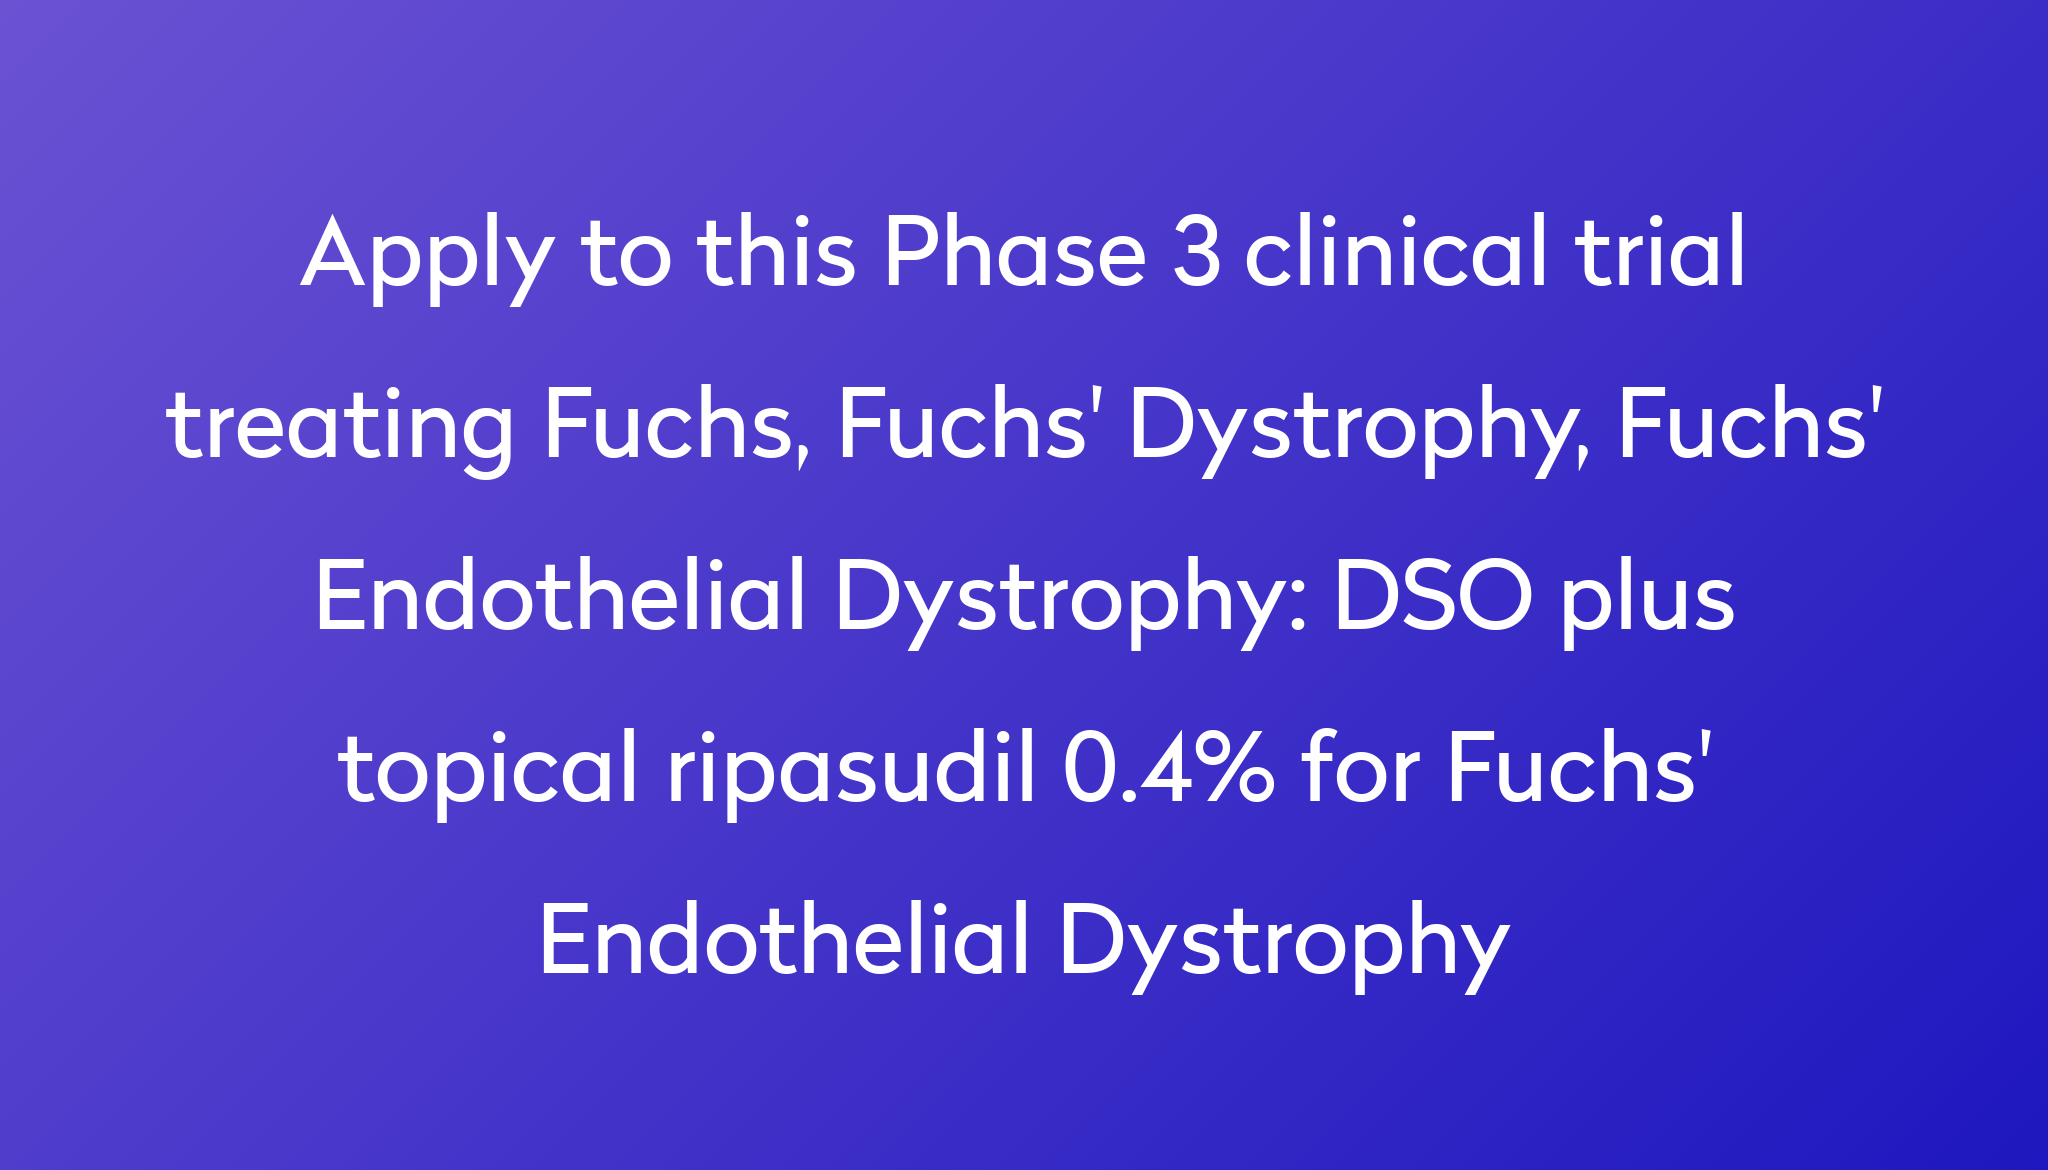 DSO plus topical ripasudil 0.4% for Fuchs' Endothelial Dystrophy ...